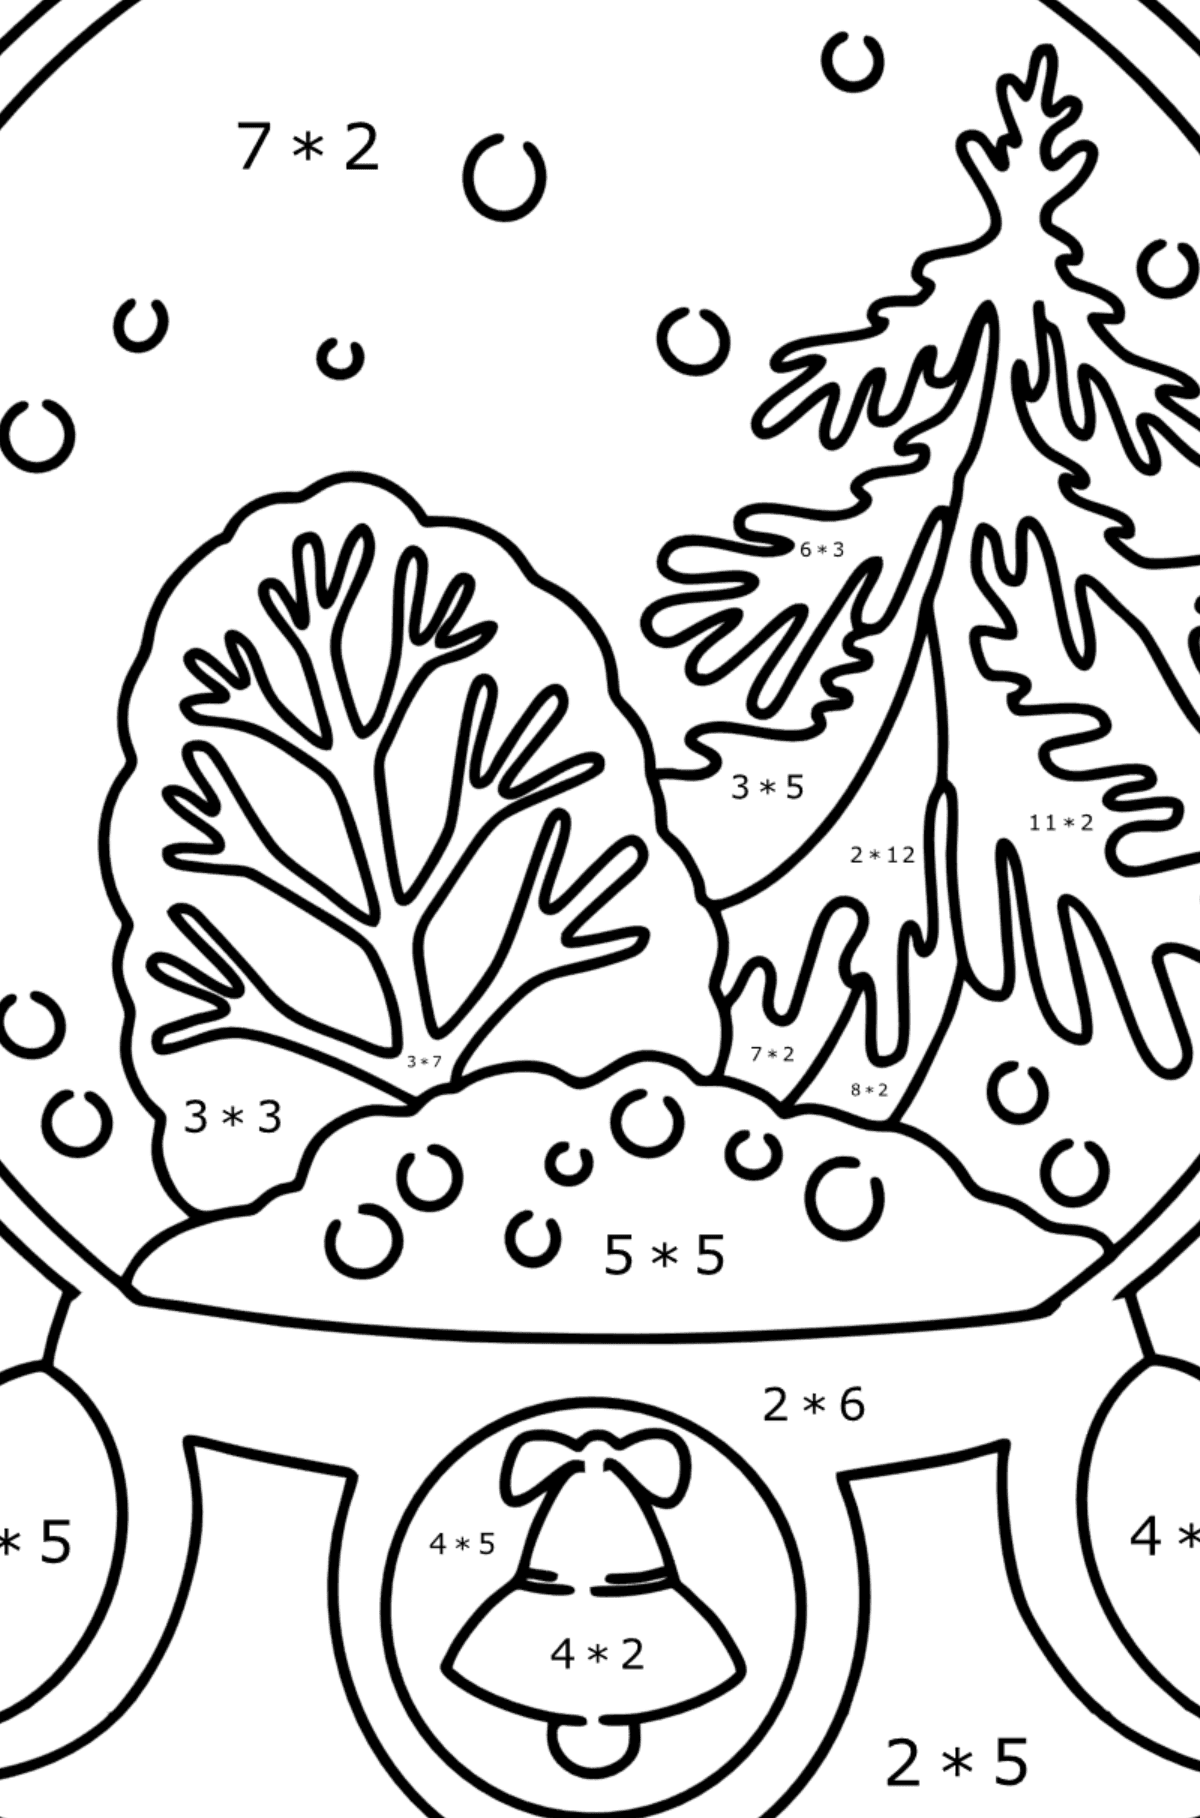 Snow Globe coloring page - Math Coloring - Multiplication for Kids